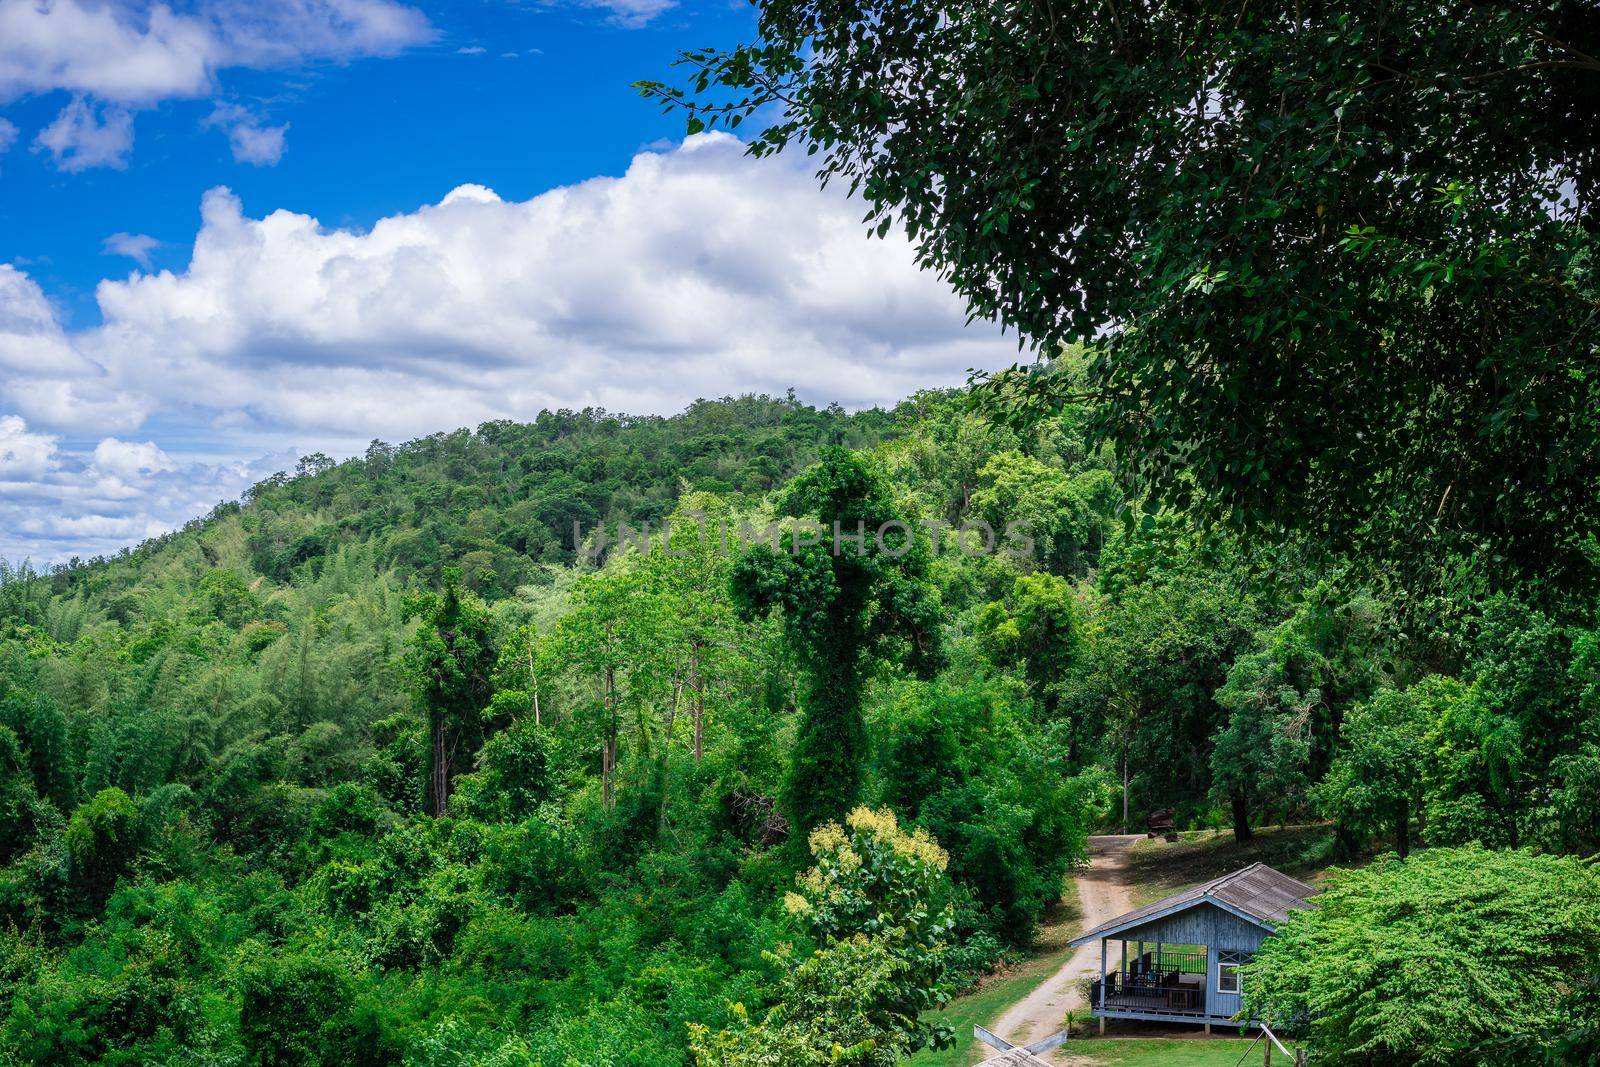 Wooden house in the jungle with cloudy sky, Thailand by domonite